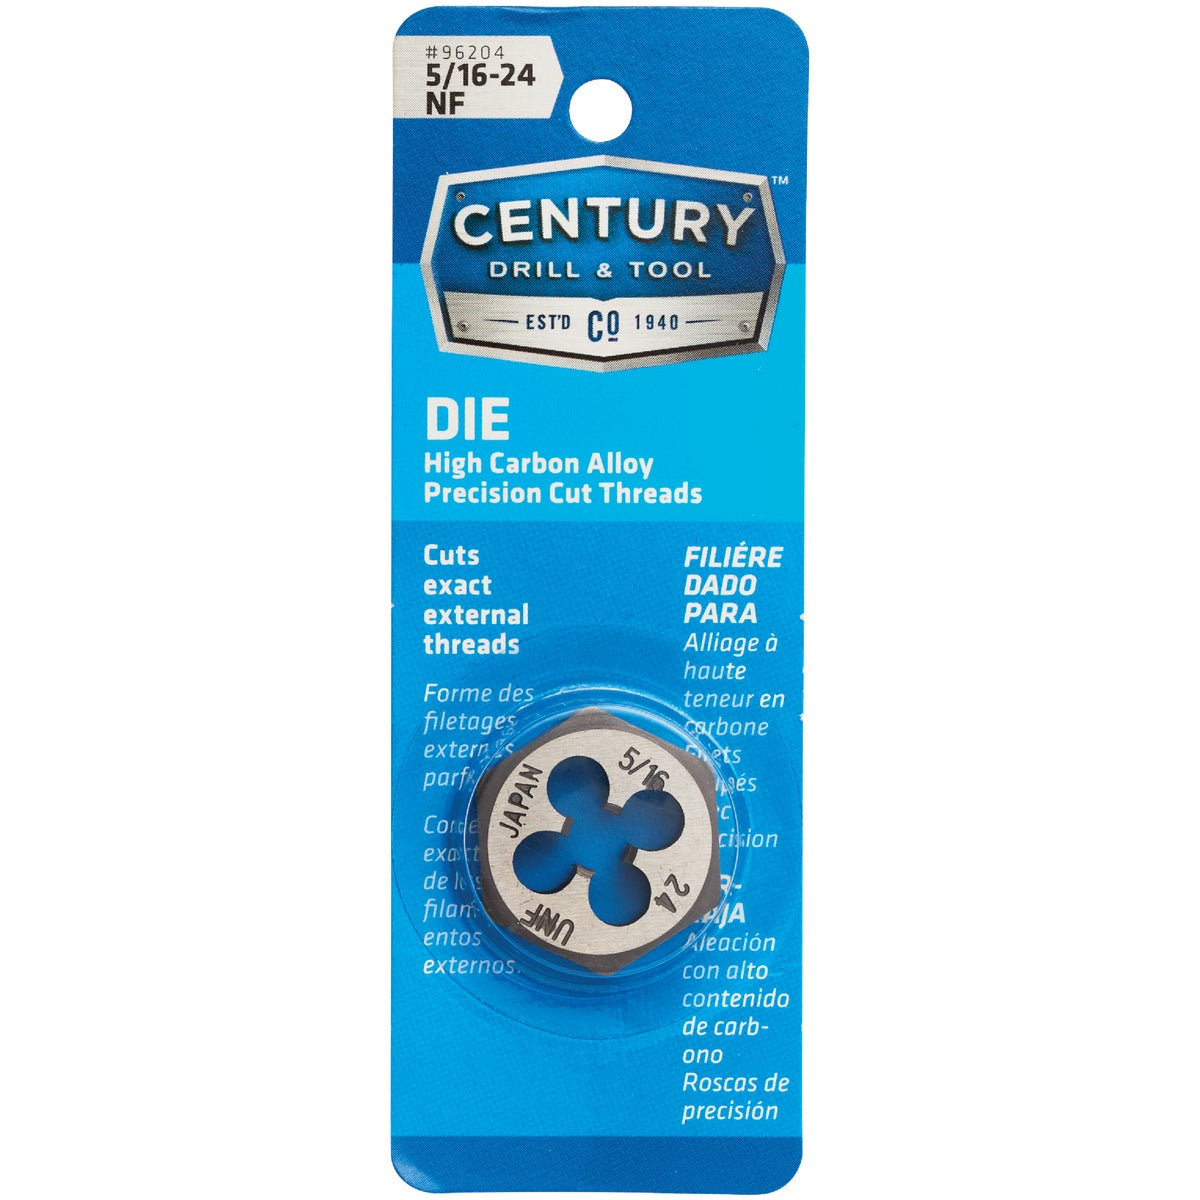 Century Drill & Tool 5/16-24 National Fine 1 In. Across Flats Fractional Hexagon Die